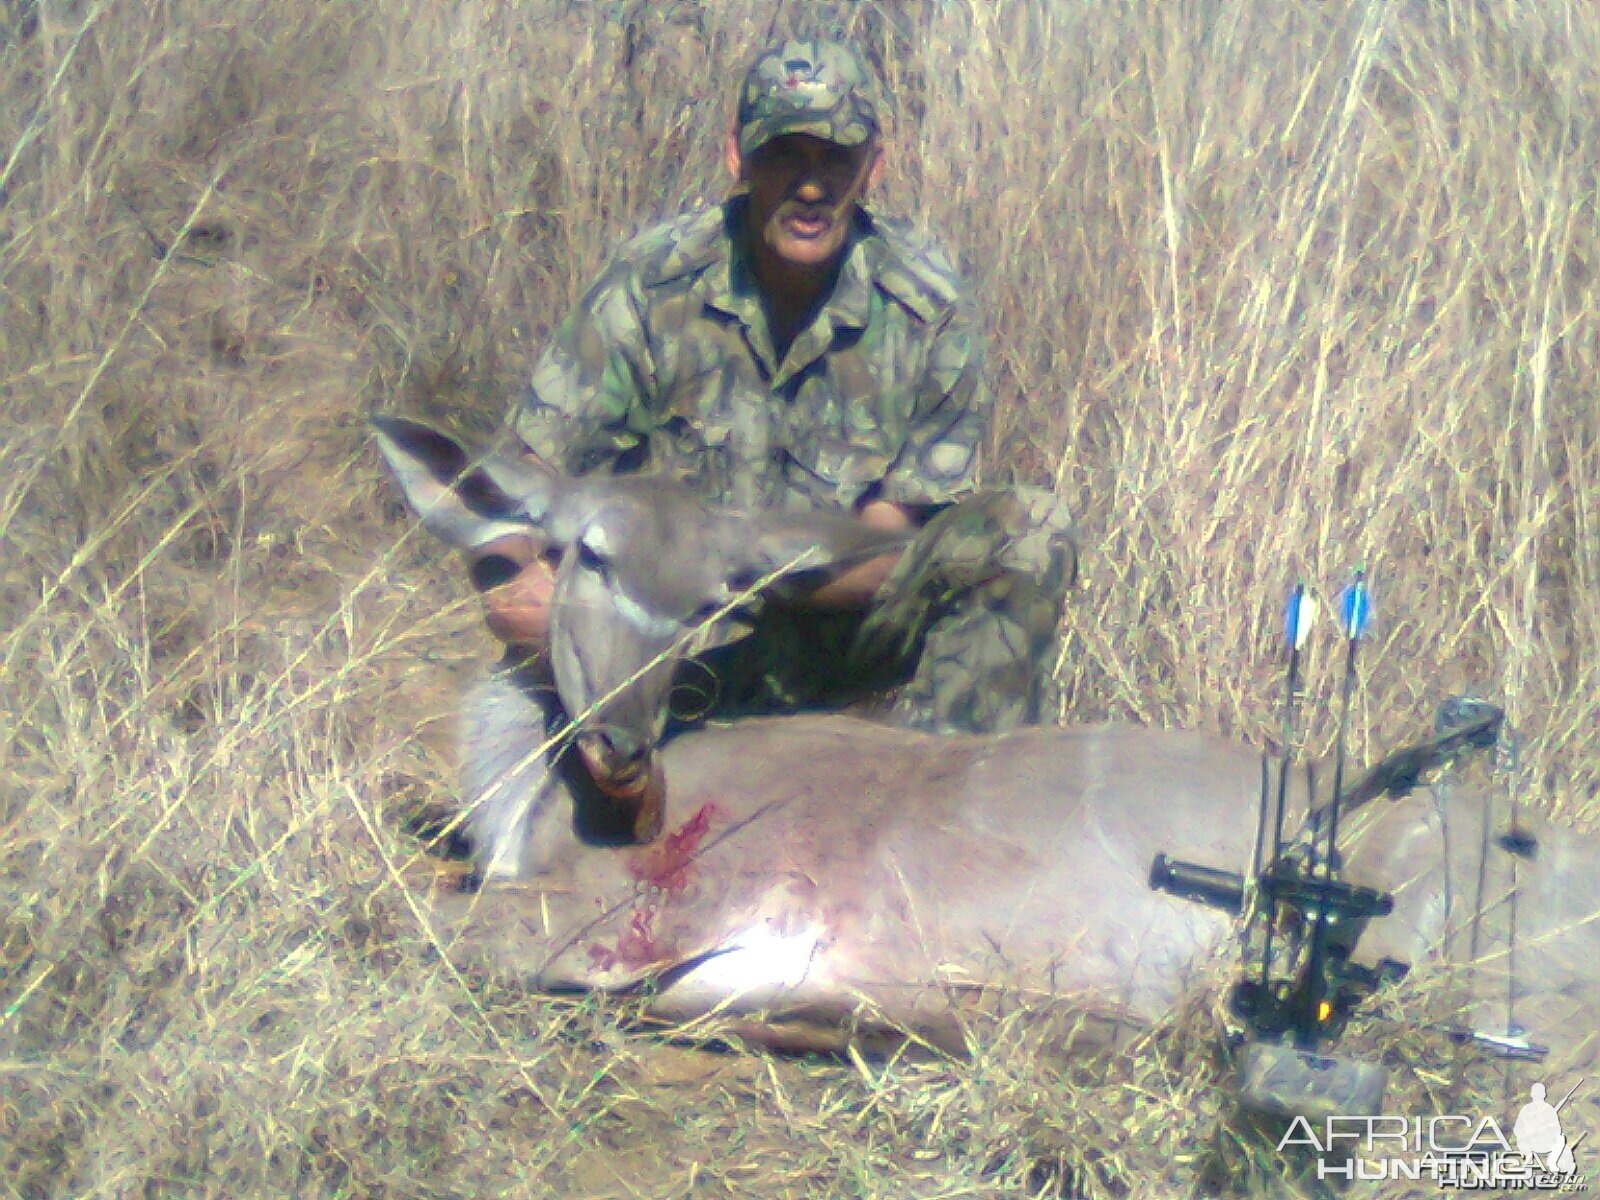 Oom Danie and his kudu cow with bow